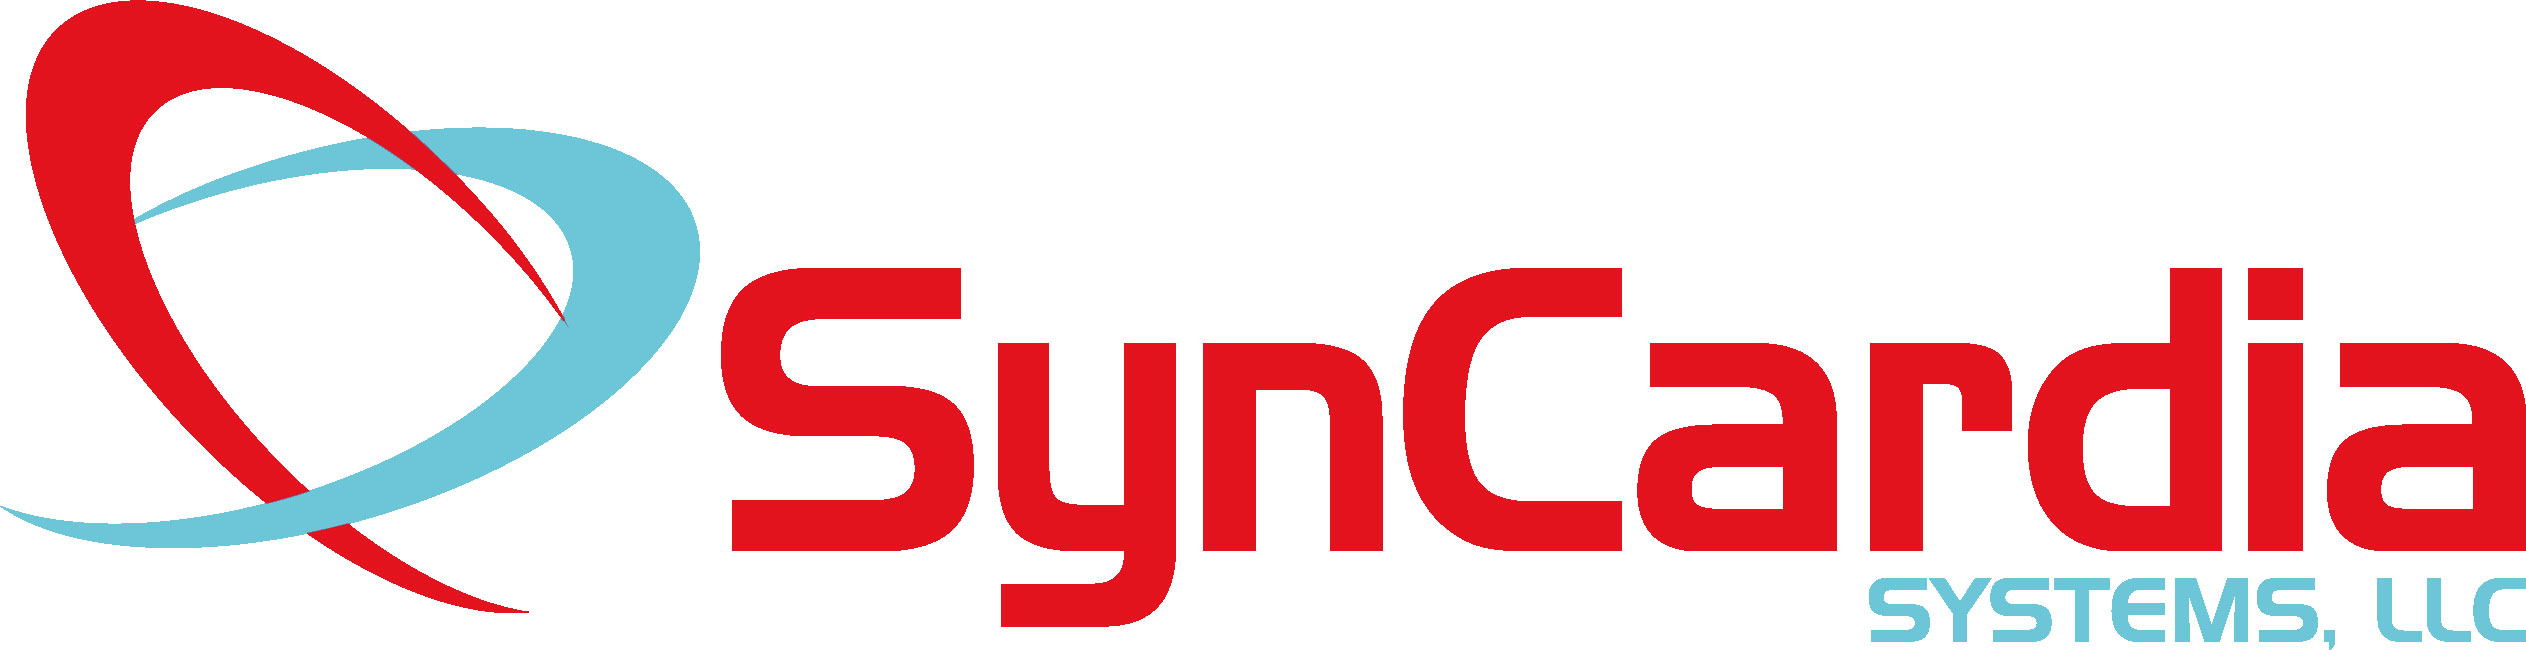 SynCardia Systems, L